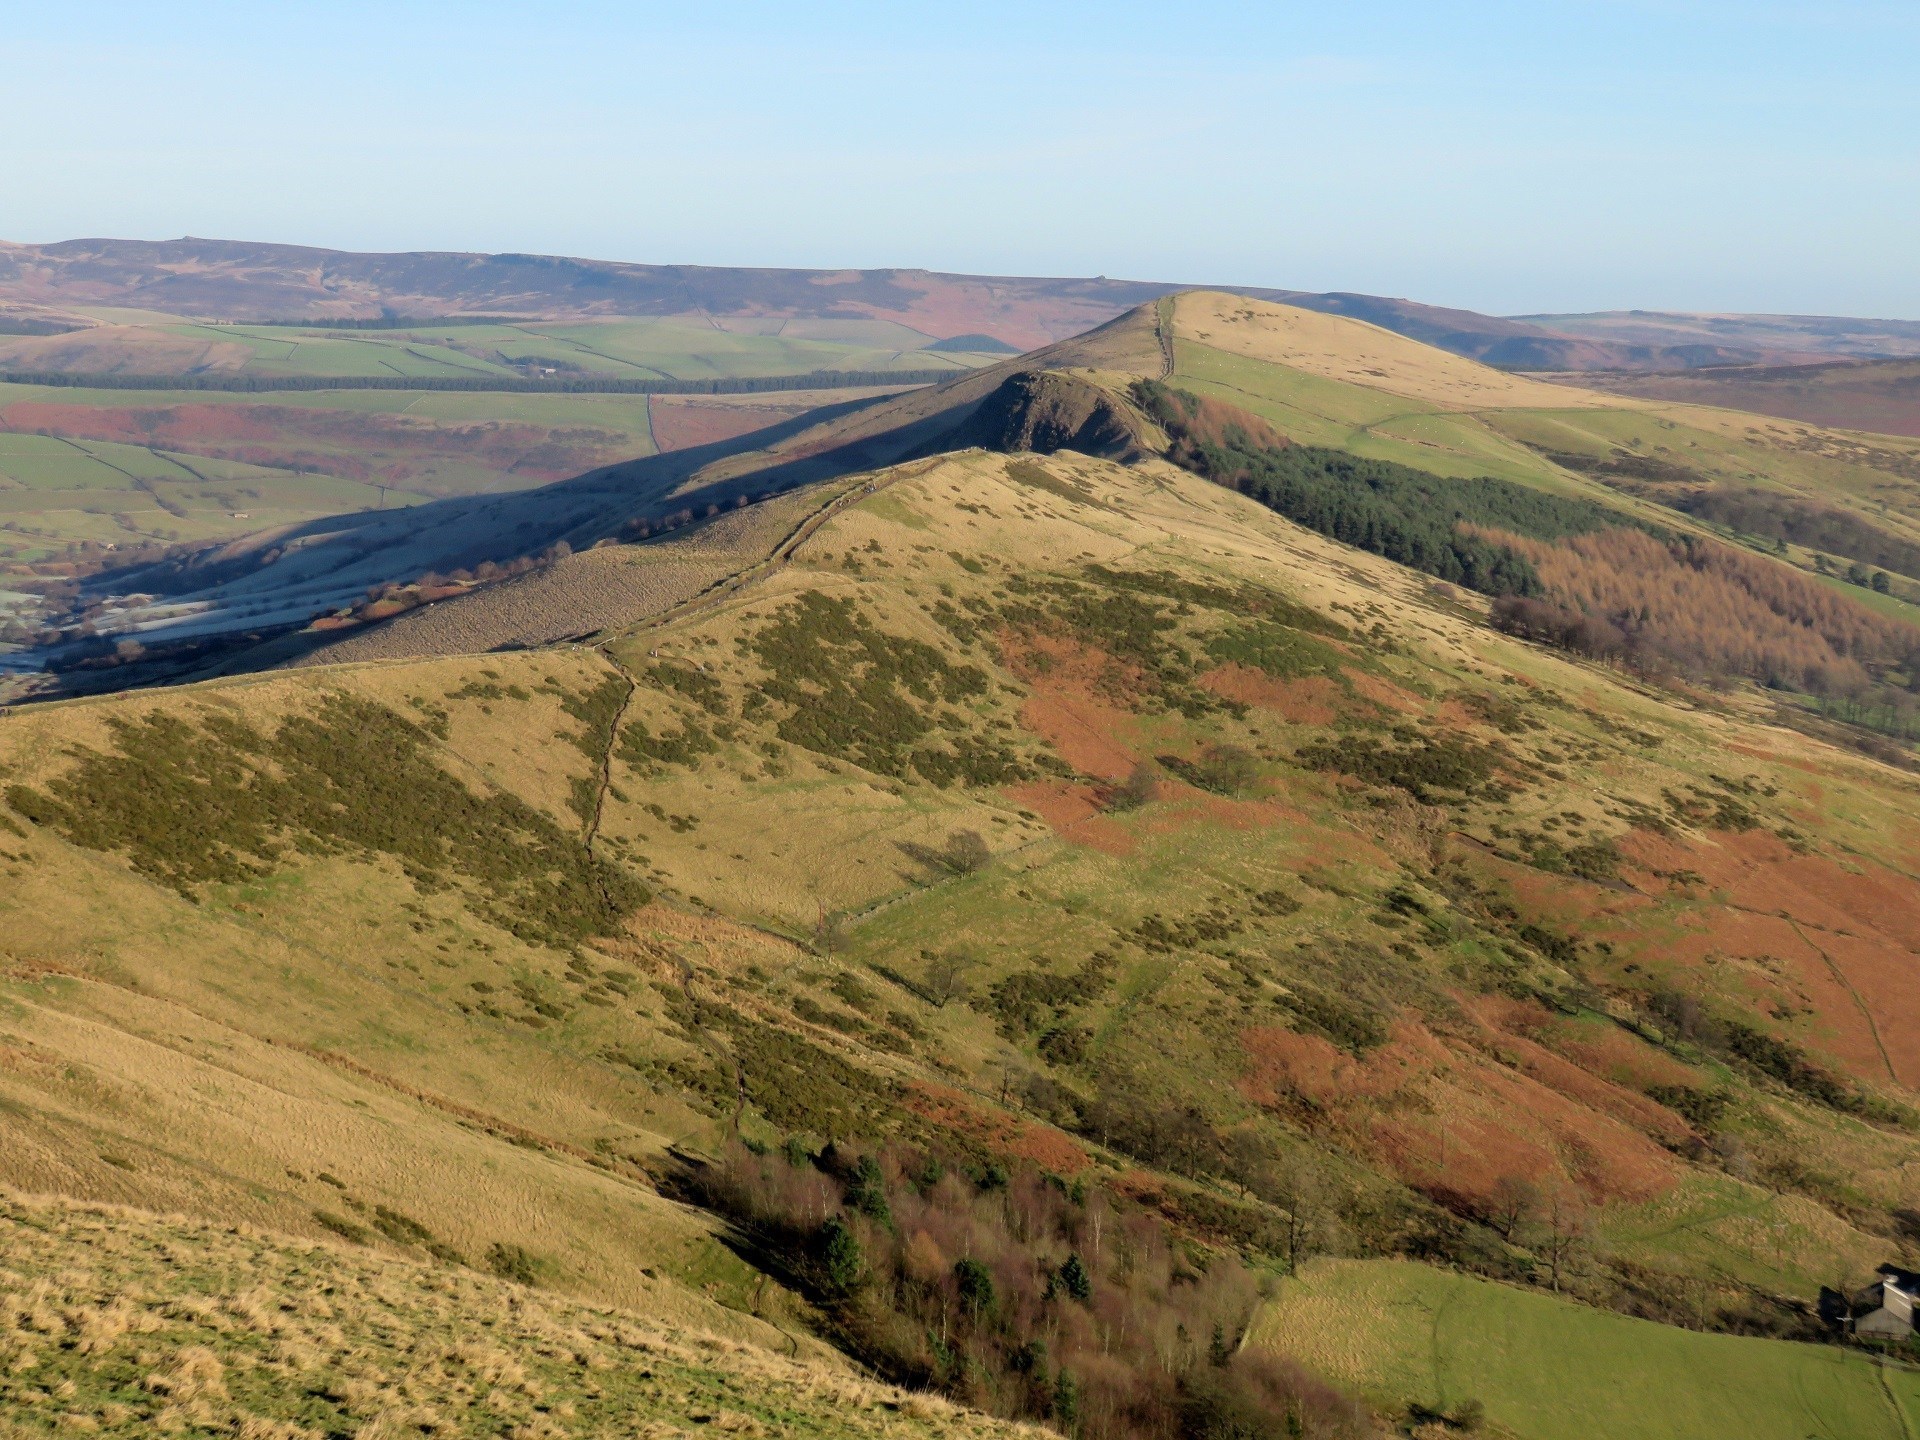 Walk up Mam Tor and the Great Ridge from Castleton - Peak District